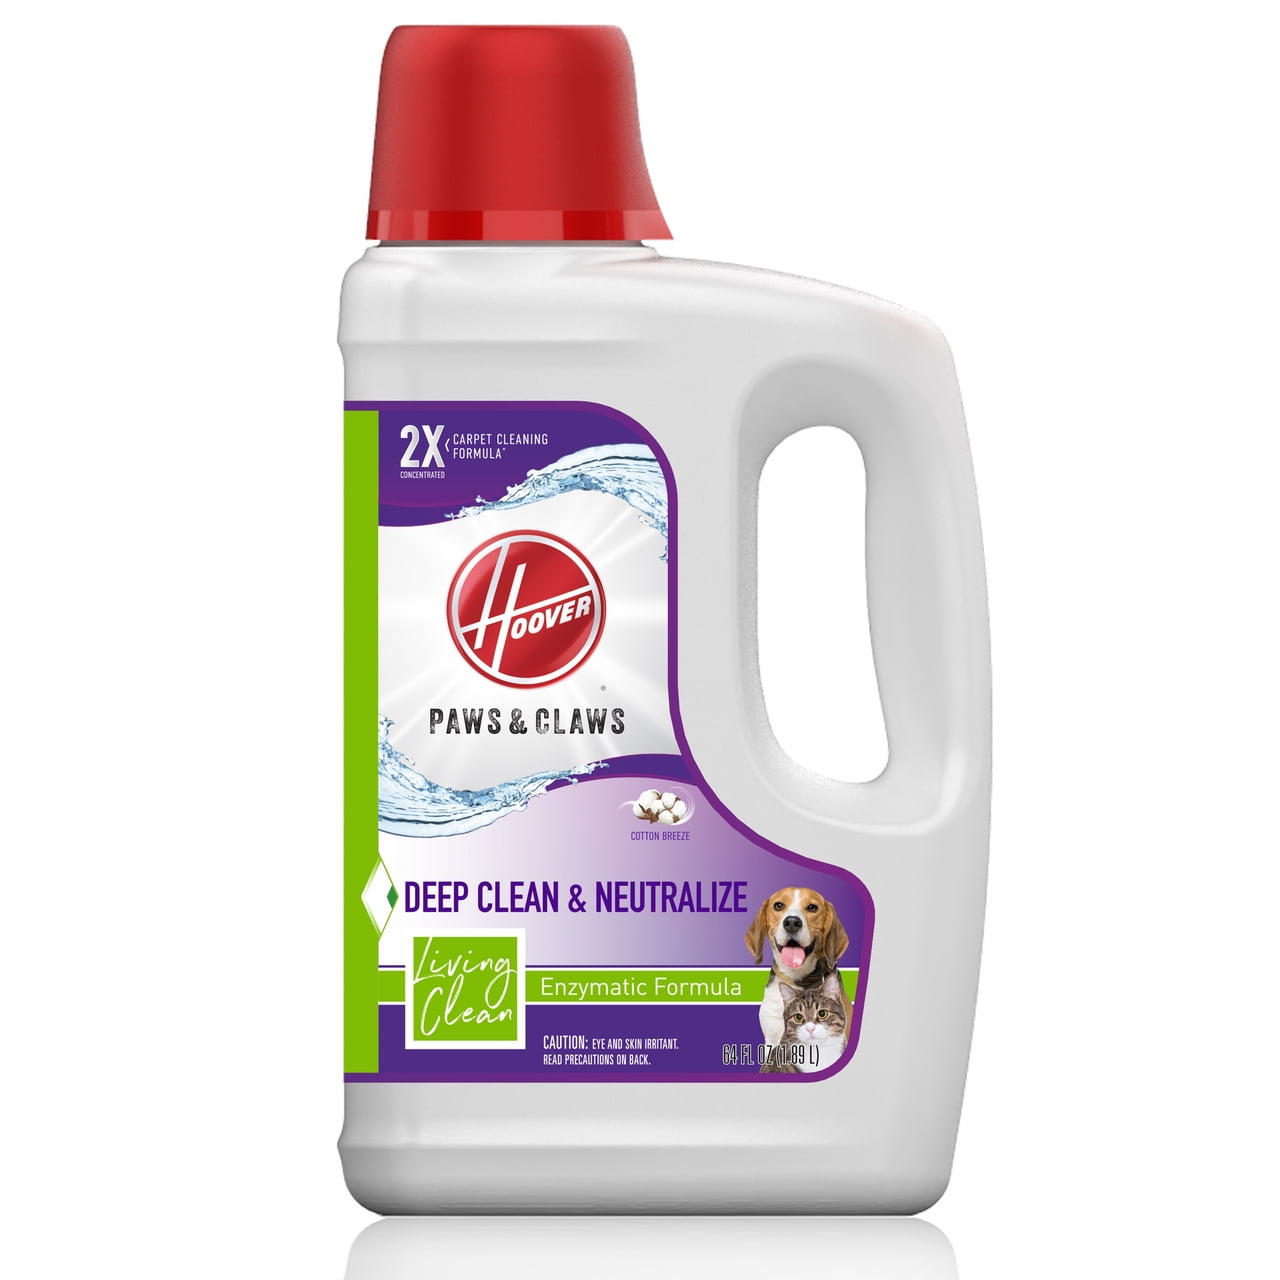 Hoover Pet Stain & Odor with Stain Guard Carpet Cleaner Solution